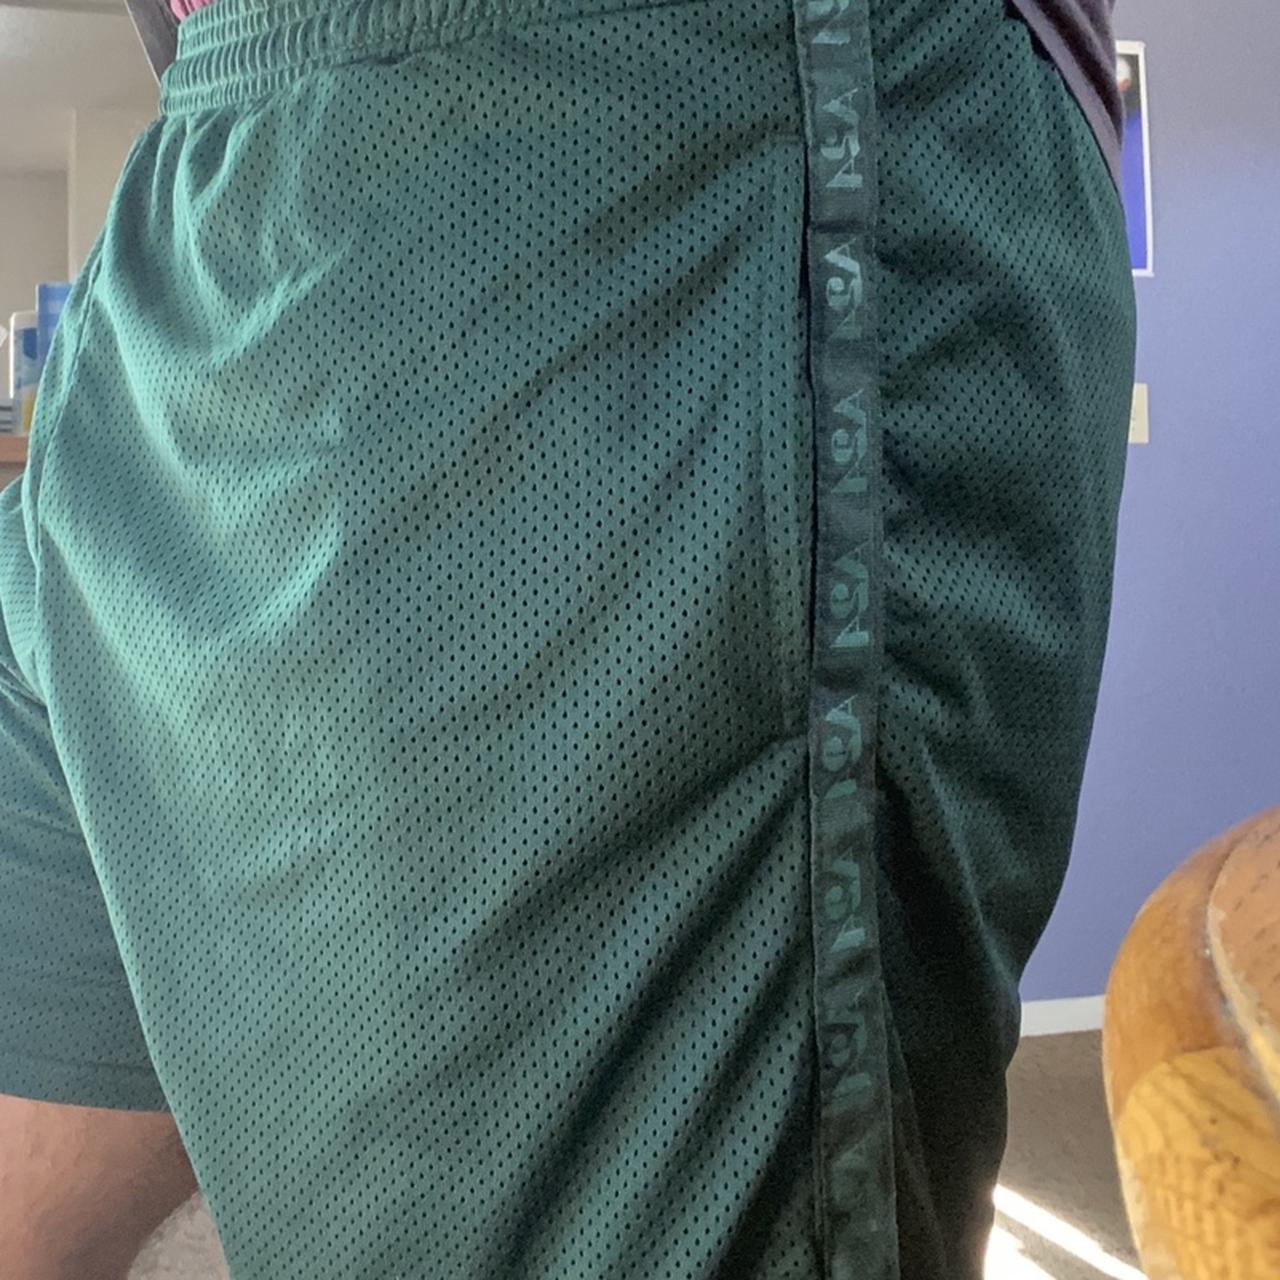 A24 Green Gym shorts, Unisex mesh shorts with deep